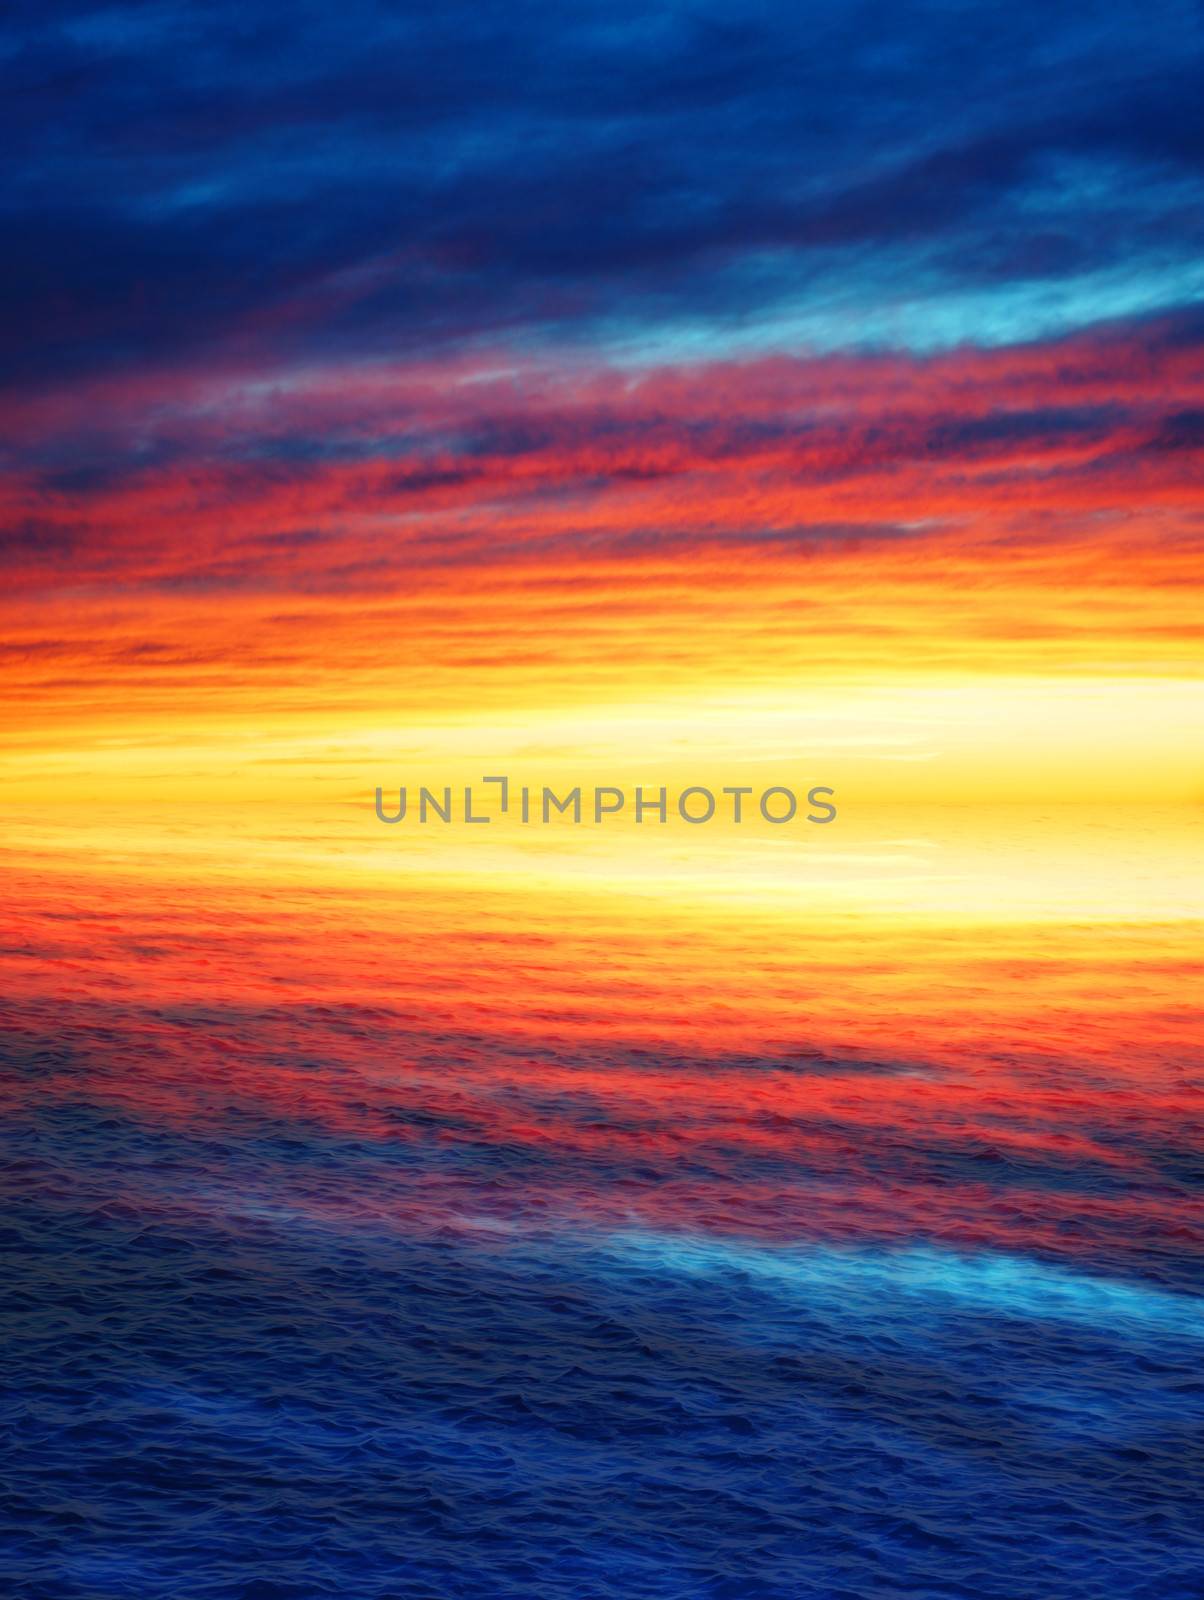 Stunning sunset with very colorful clouds reflected on the waves of the ocean or the sea, nature background